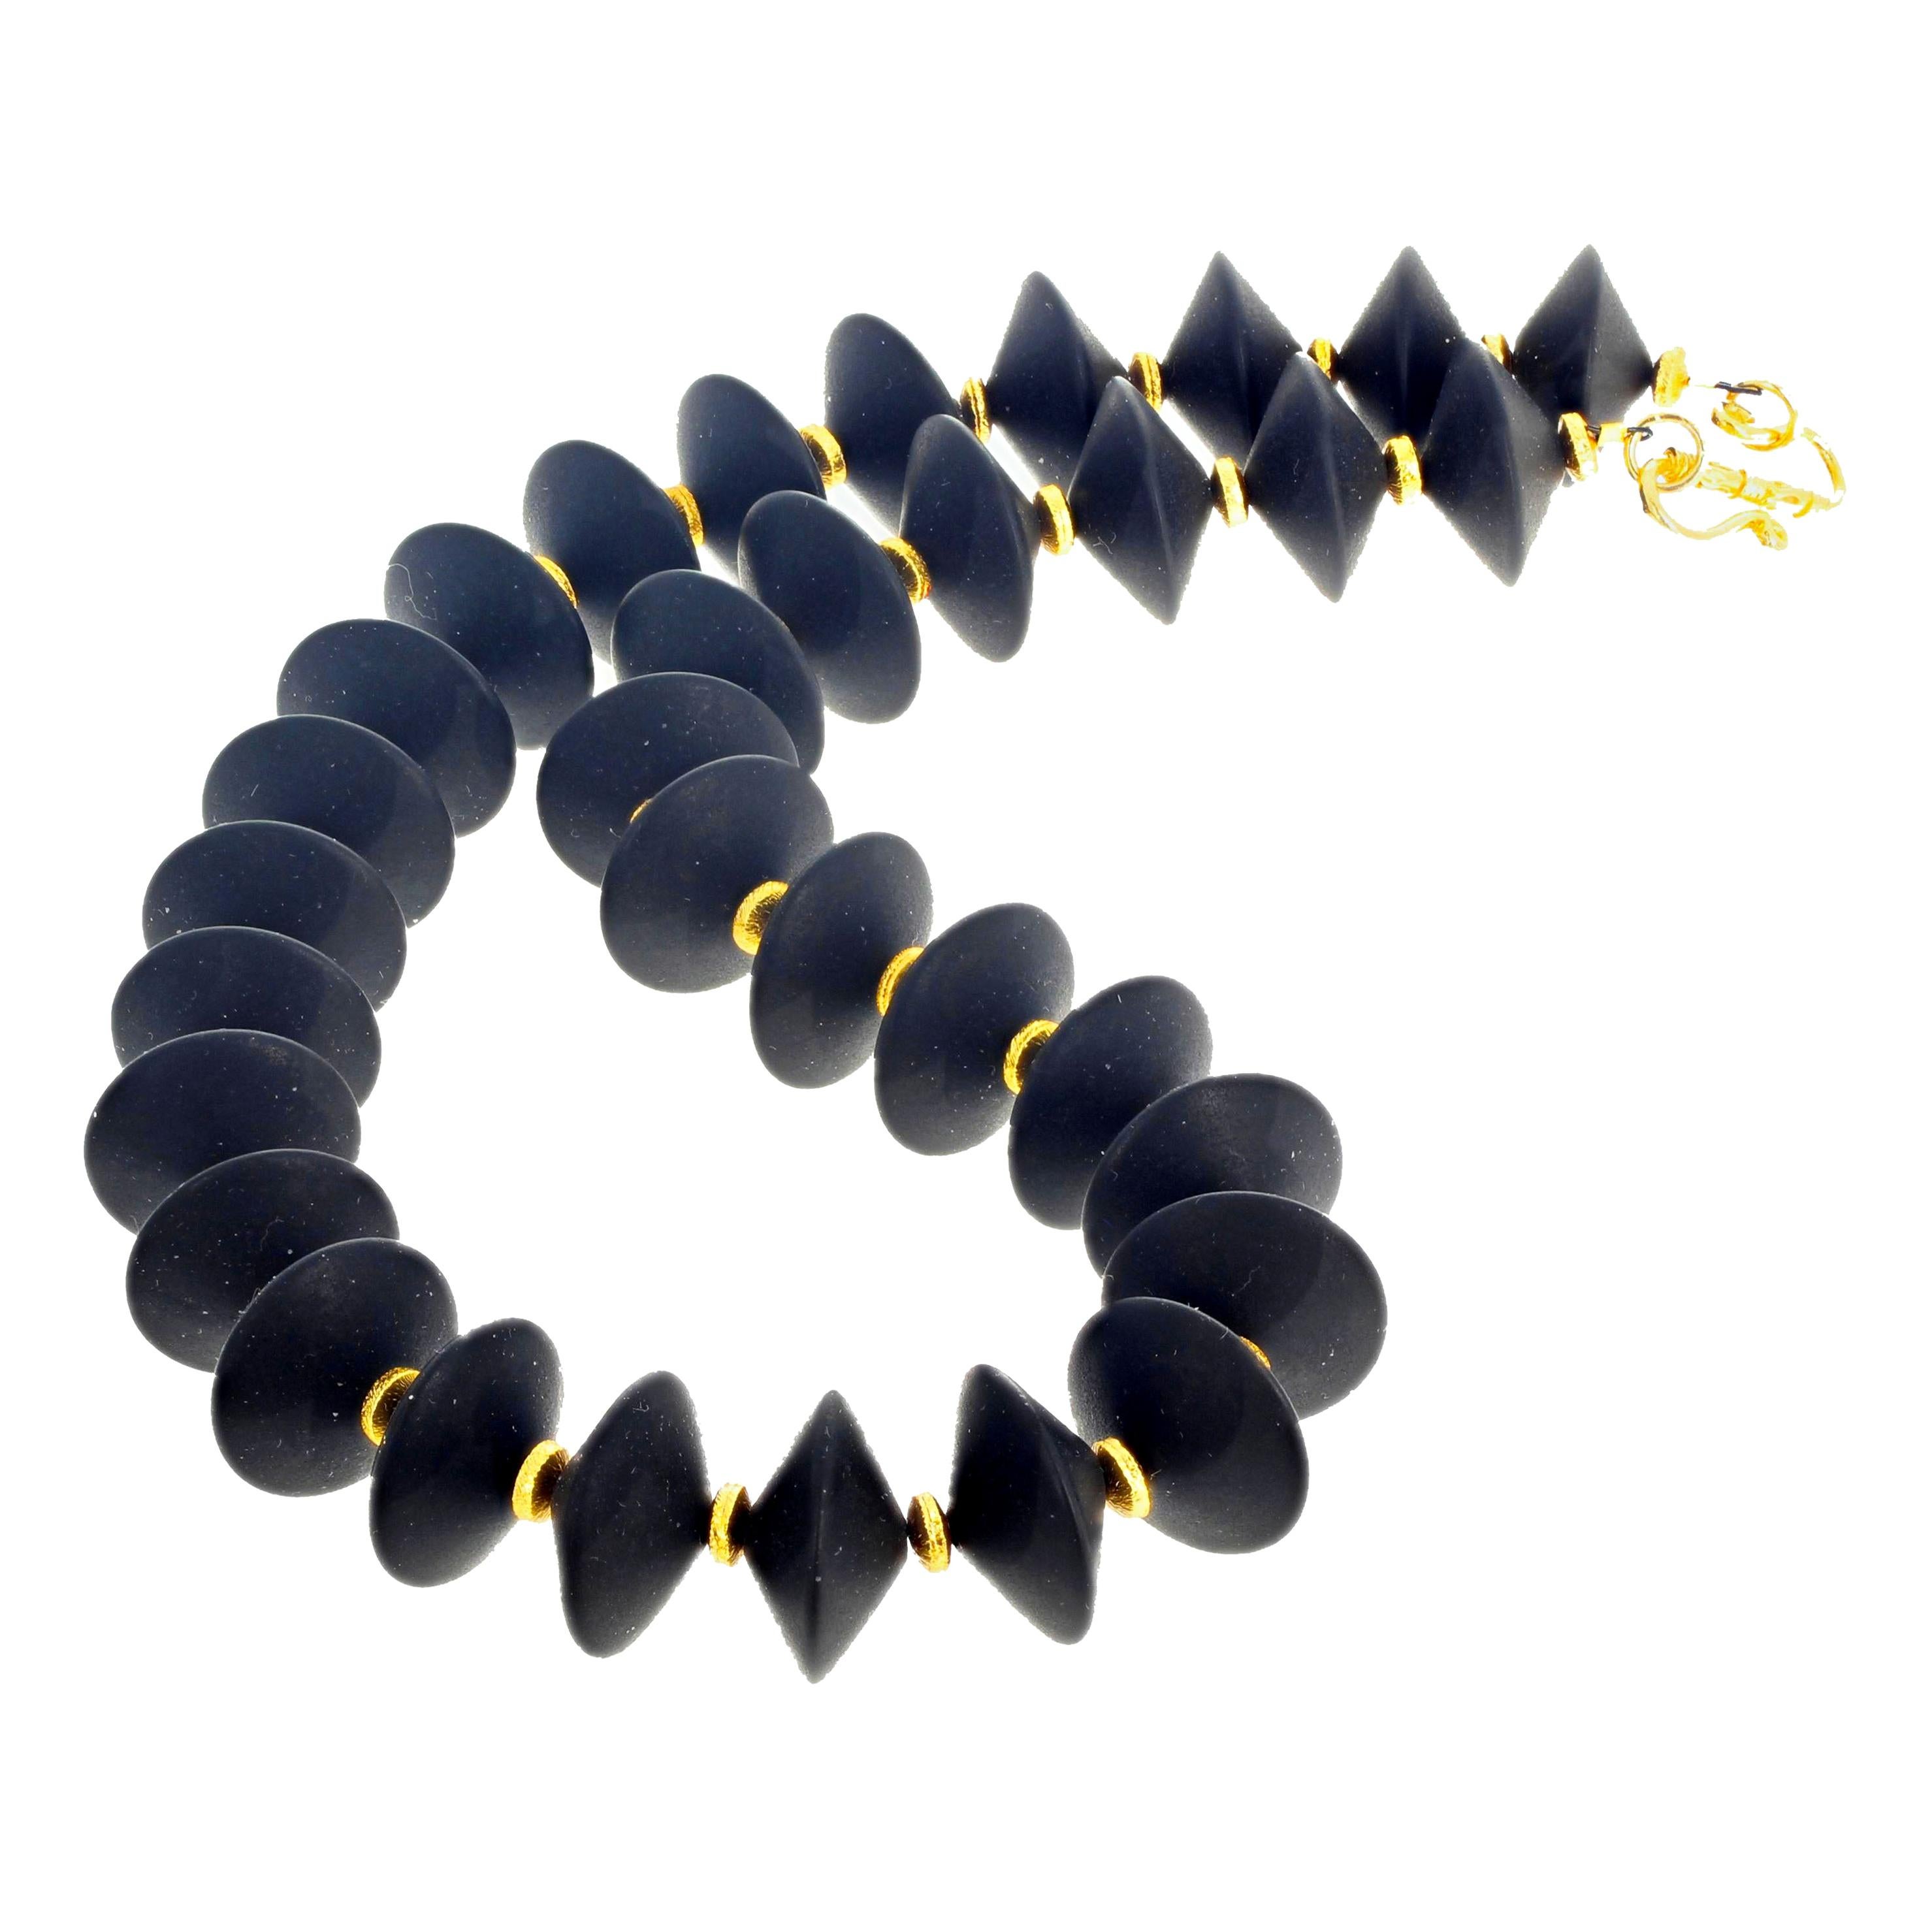 These lovely interesting Black Onyx rondels are 18 mm and are enhanced with tiny gold plated sterling silver little rondel spacers set with a gold plated easy to use hook clasp in this 17 1/2 inch long necklace.   